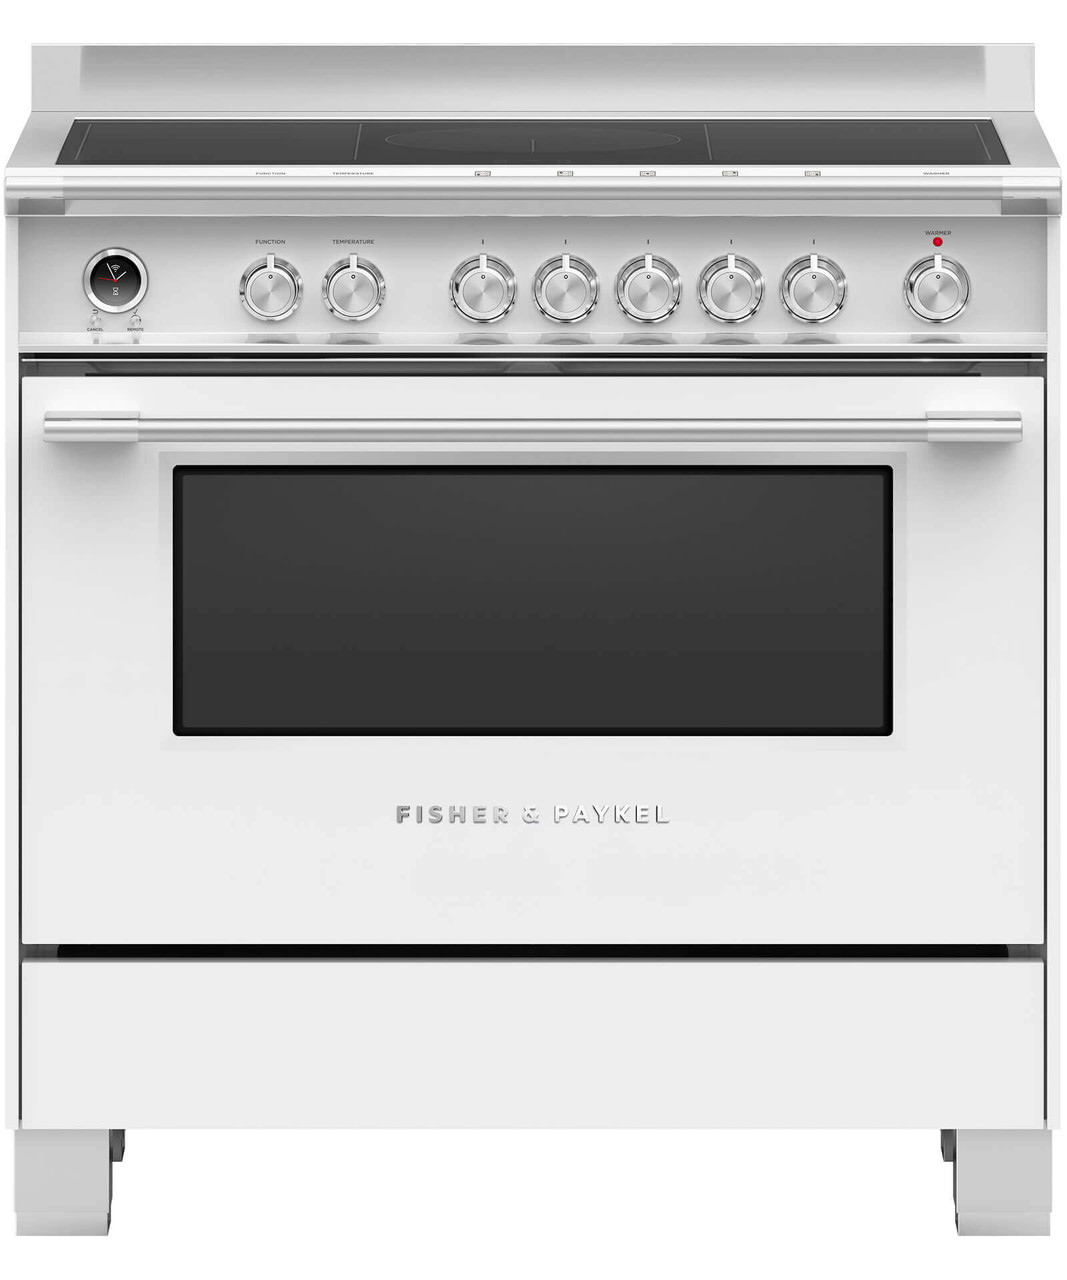 OR90SCI6W1 - 90cm Classic Style Freestanding Cooker, 4 Zone Induction, Pyrolytic Cleaning - White